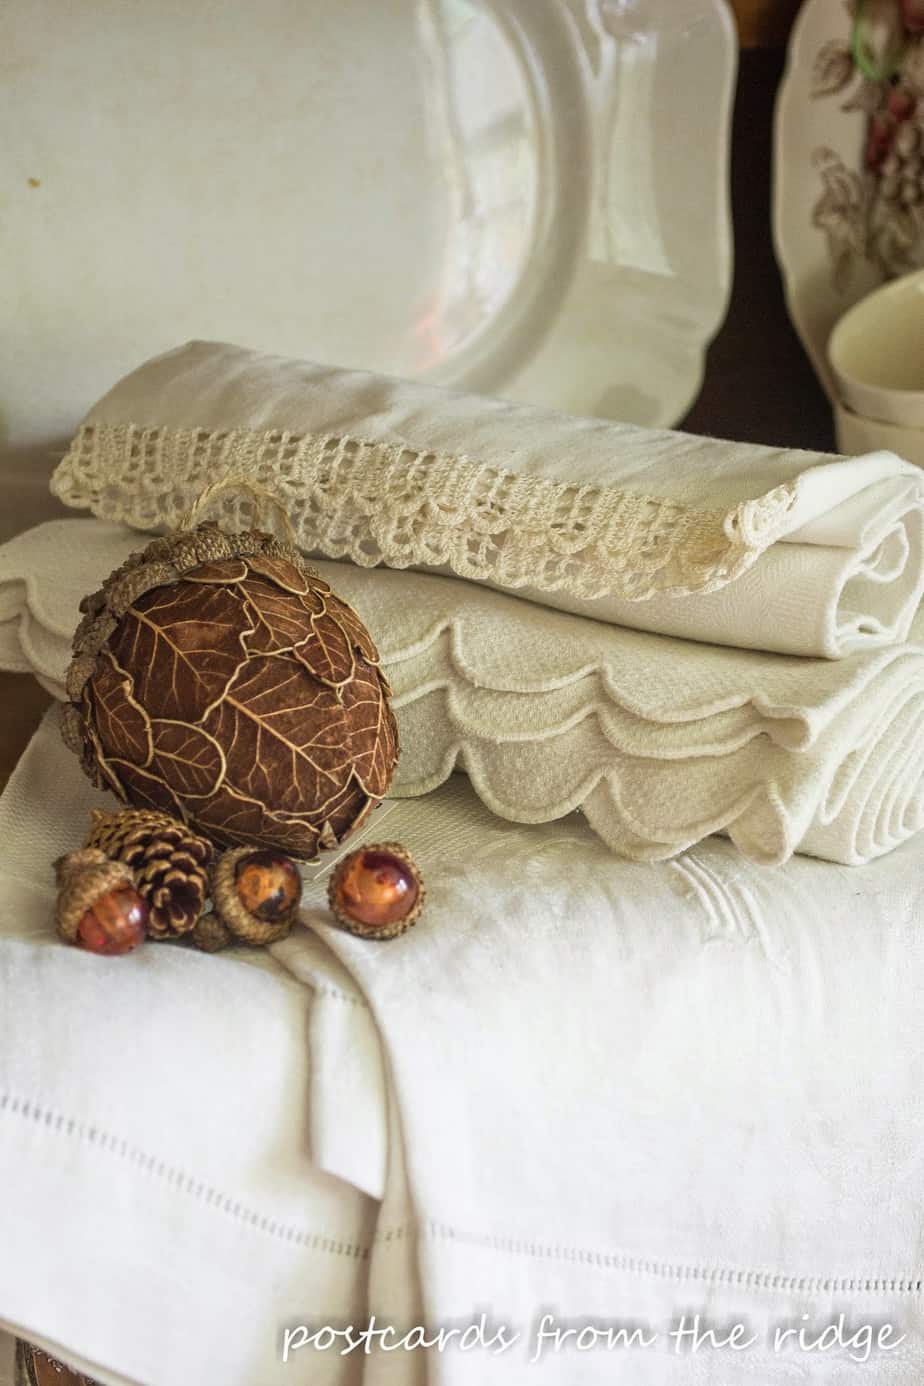 Vintage fall decor. Swoon! Lots of great ideas for using vintage, natural, and farmhouse style decor for fall.